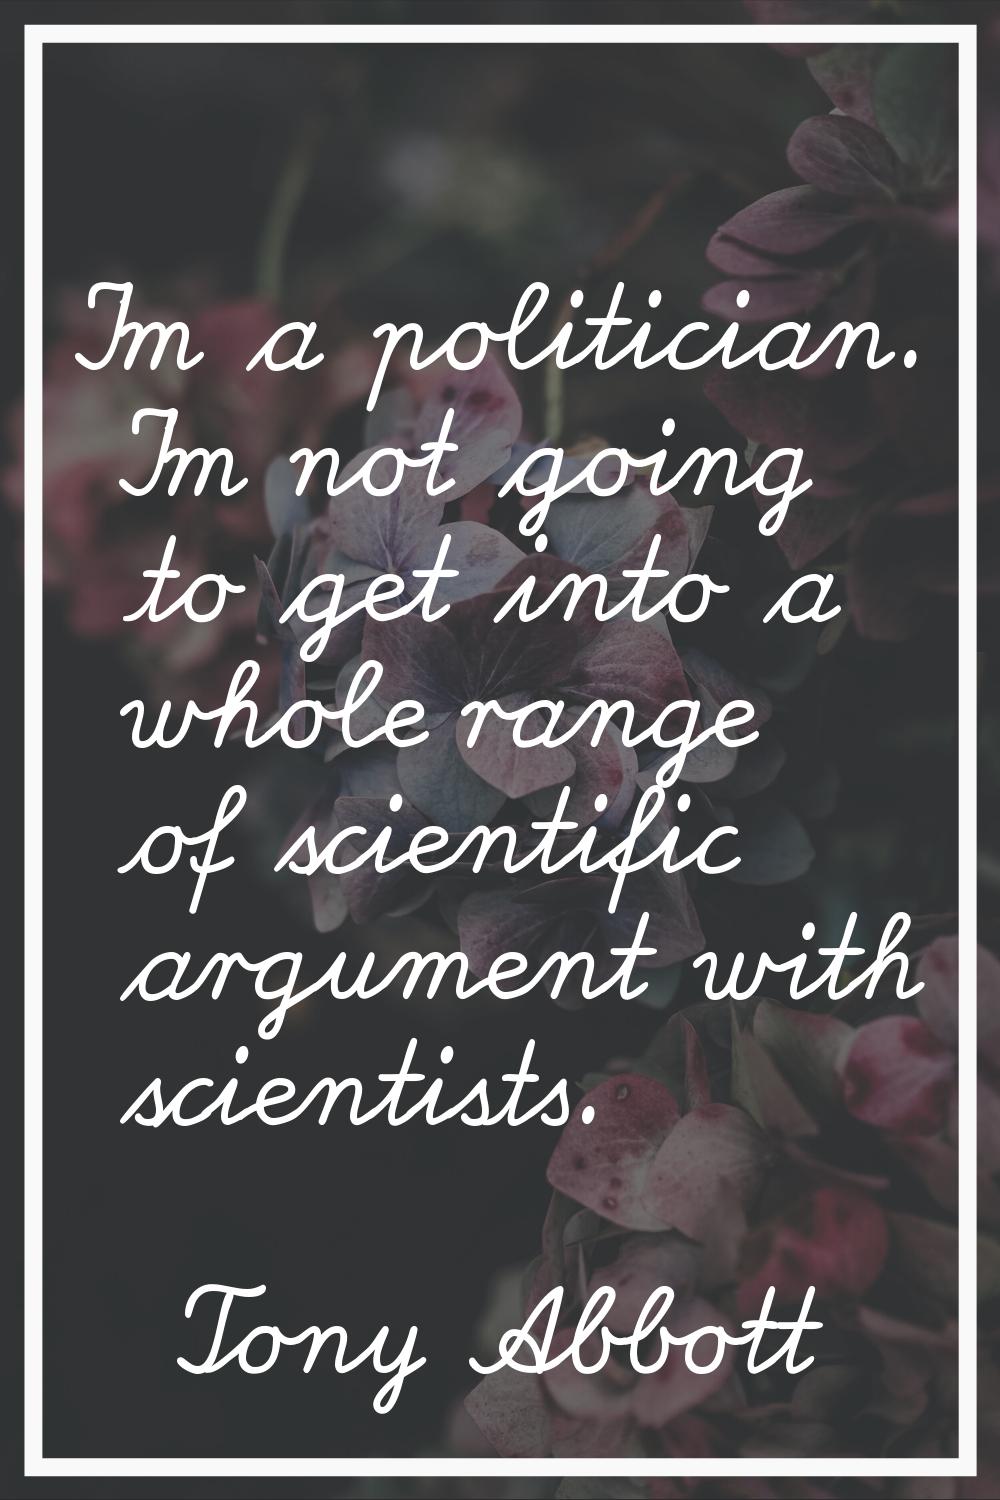 I'm a politician. I'm not going to get into a whole range of scientific argument with scientists.